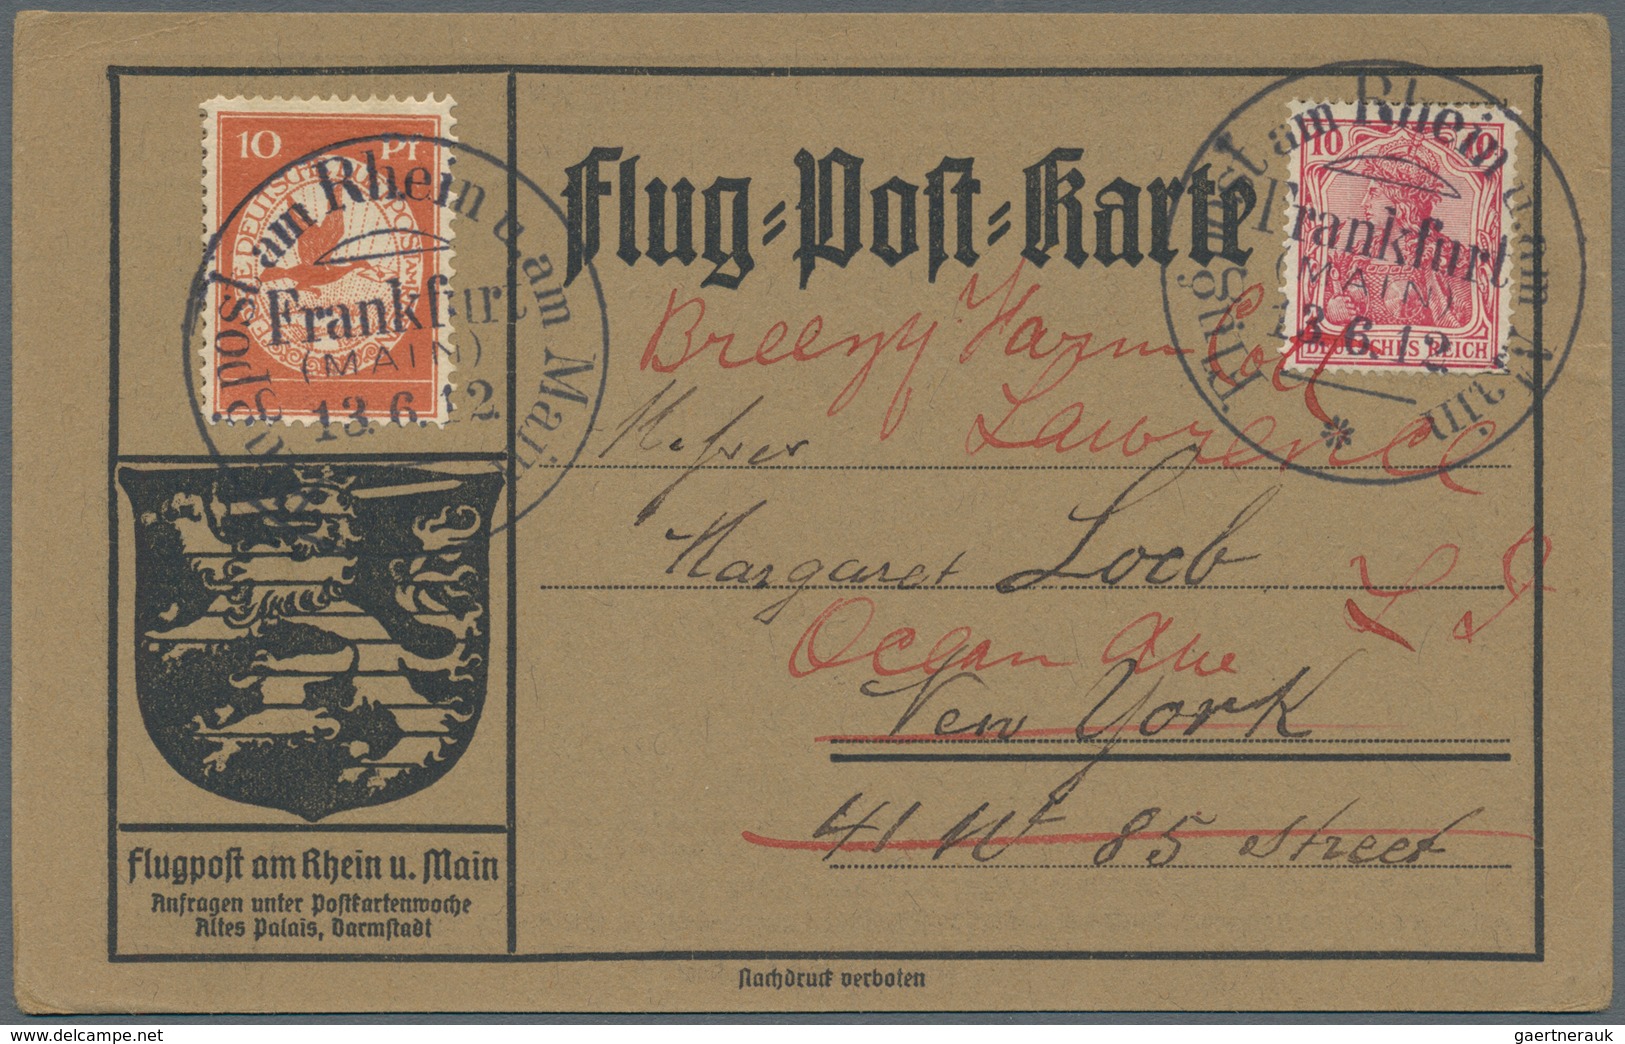 Flugpost Deutschland: 1912. Germany Official Card From The Grand Duchess Of Hesse's 1912 Flight Week - Correo Aéreo & Zeppelin